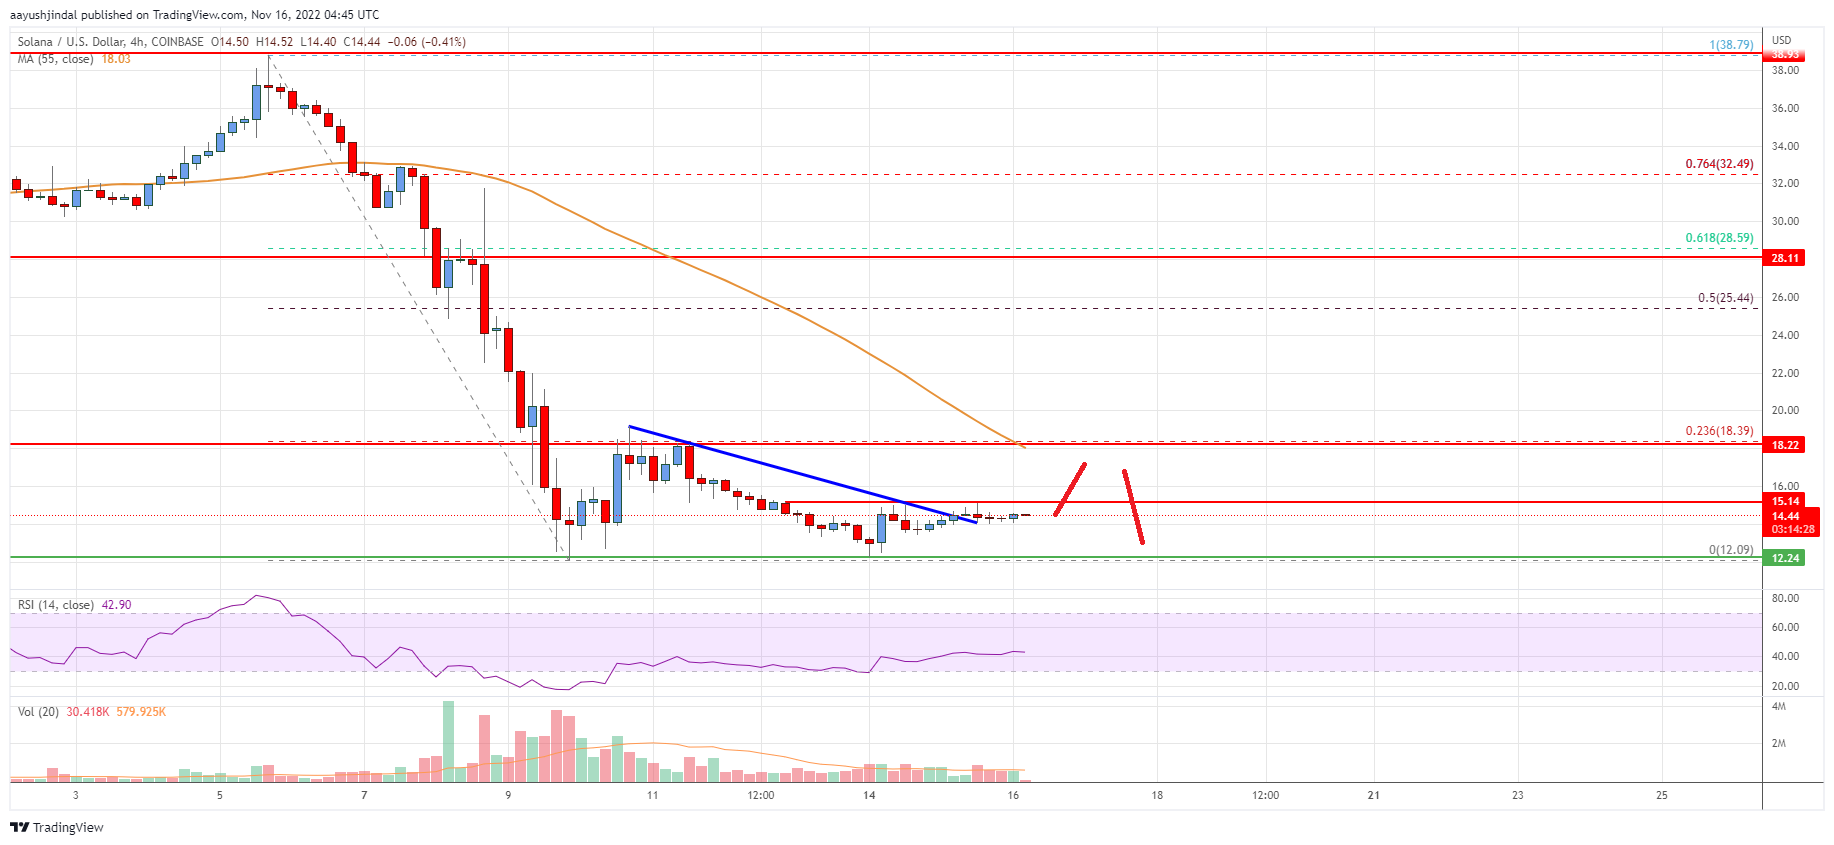 Solana (SOL) Price Analysis: Bears In Control Below $20